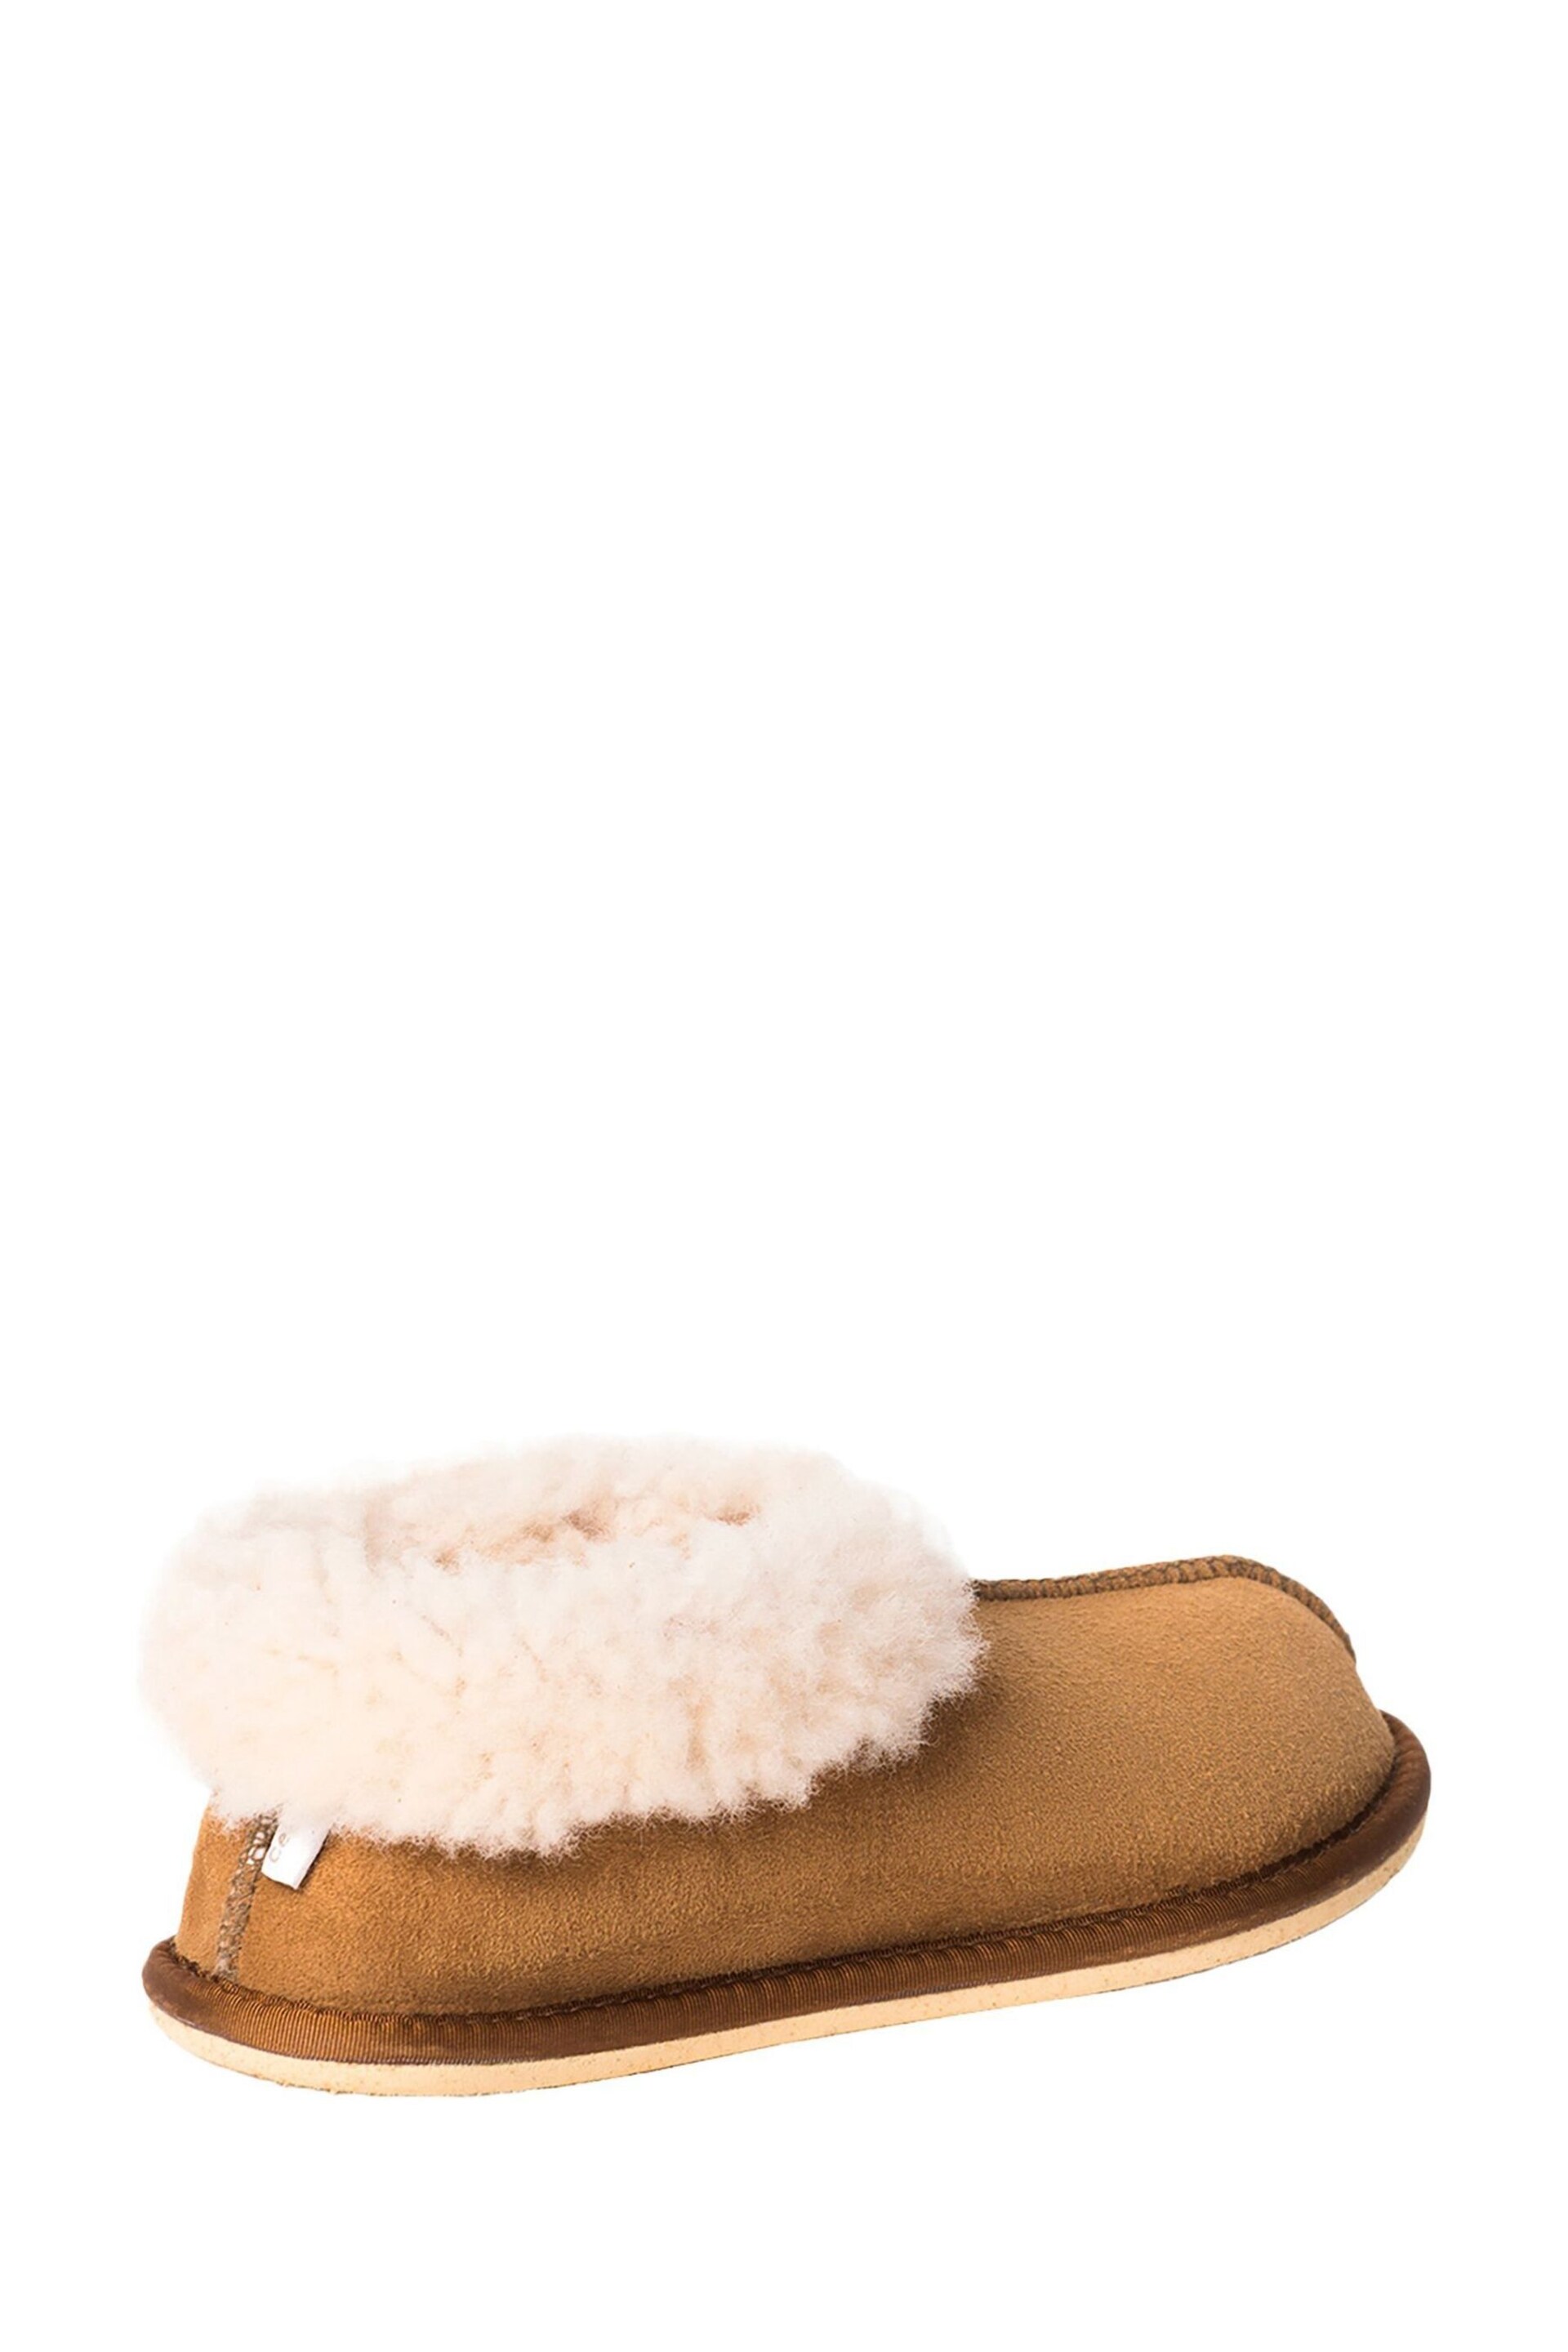 Celtic & Co. Ladies Sheepskin Bootee Slippers - Image 2 of 4